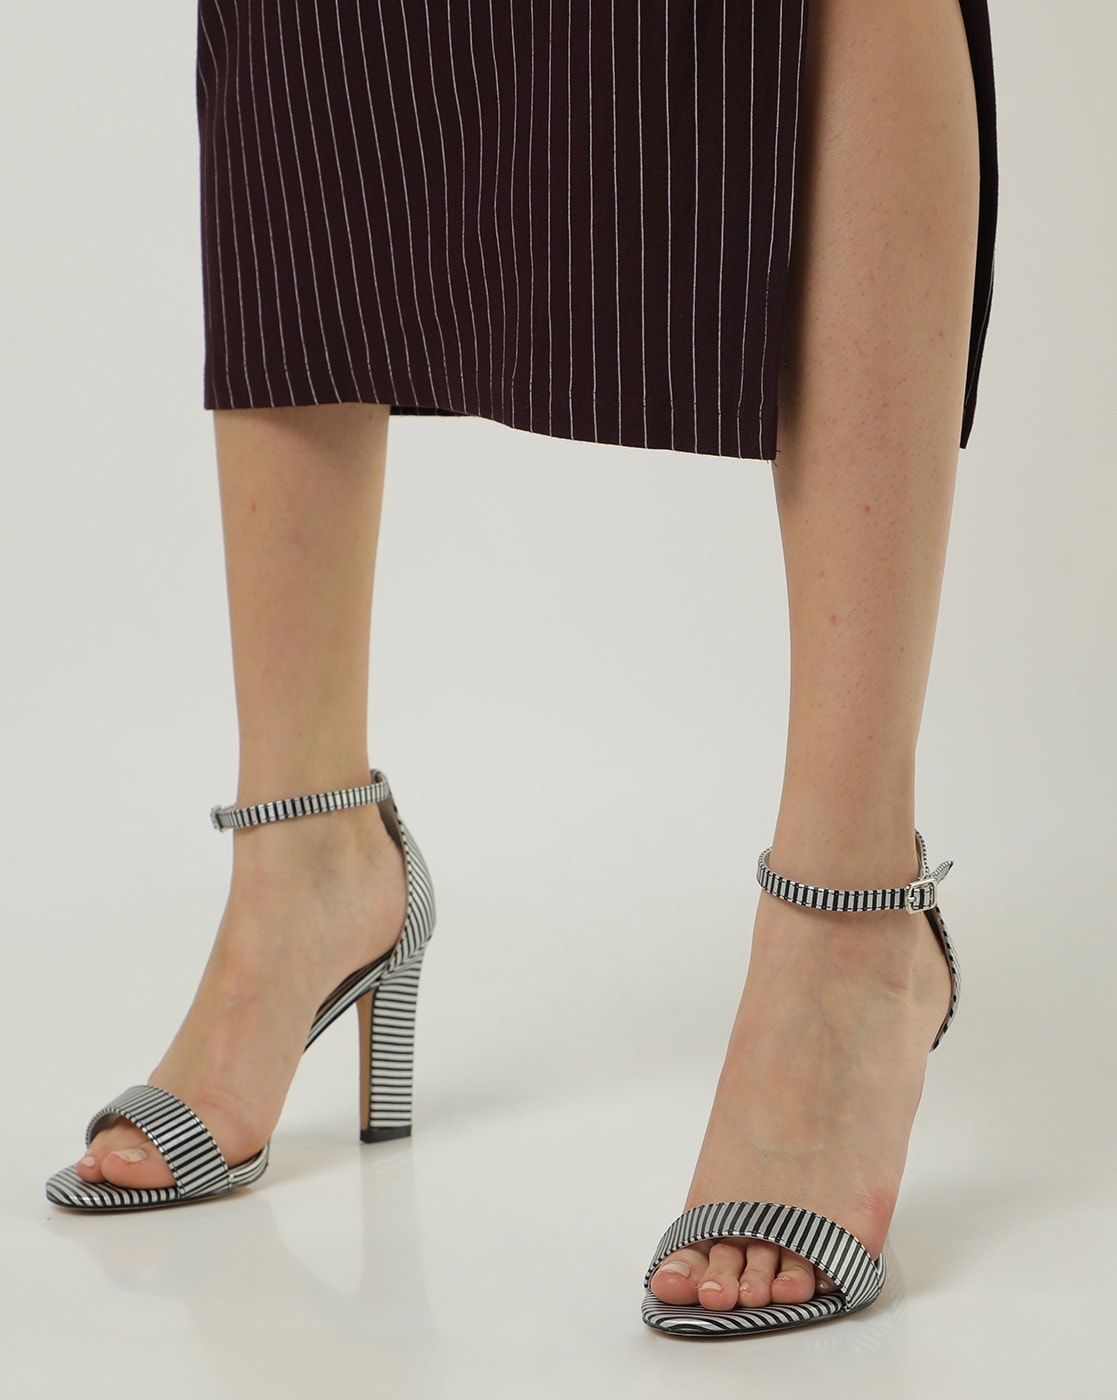 Sly Metallic Block Heel with Ankle Strap by Badgley Mishcka